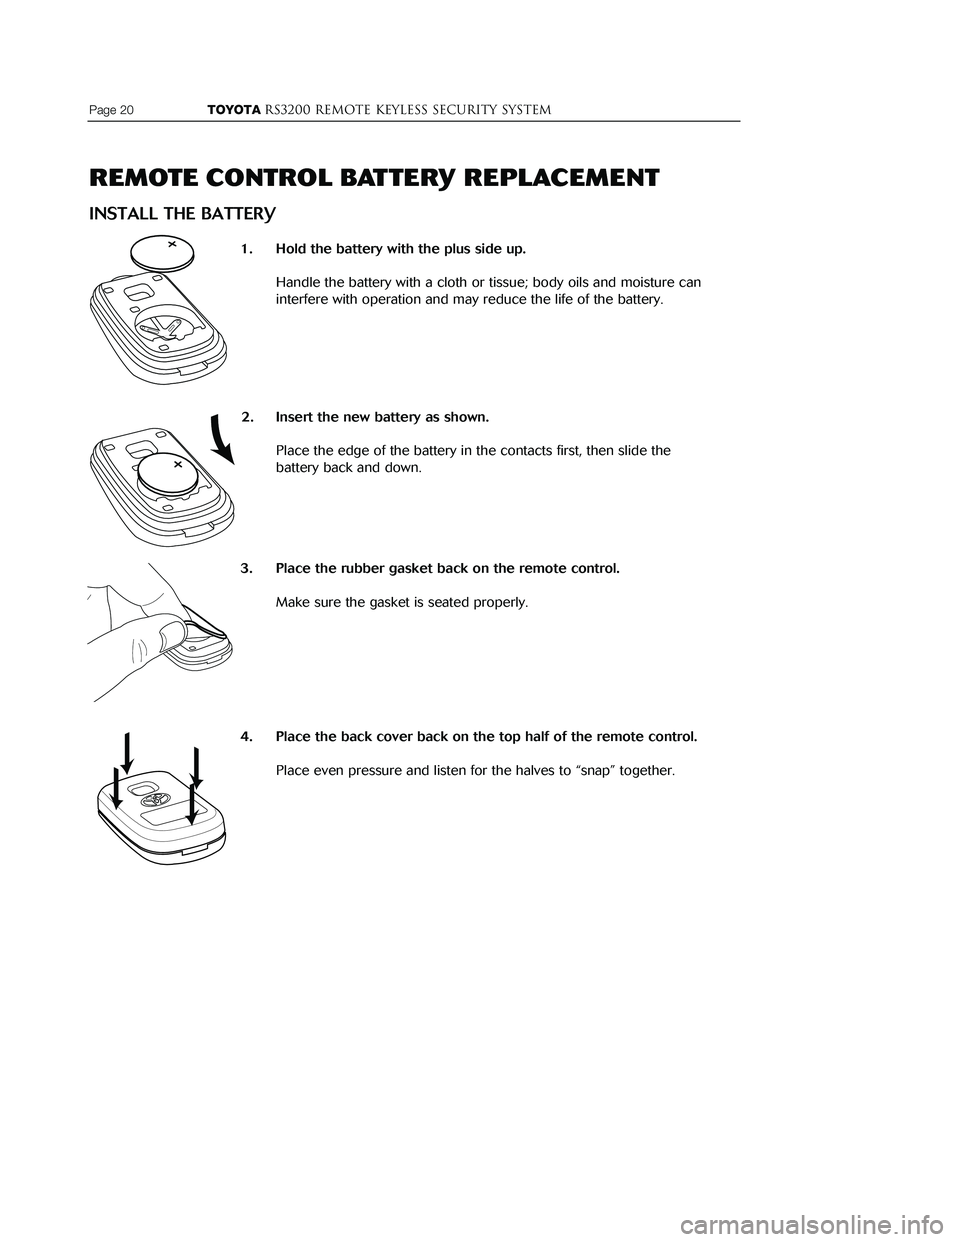 TOYOTA MR2 SPYDER 2001  Accessories, Audio & Navigation (in English) 
Page 20                    TOYOTARS3200 REMOTE KEYLESS Security system
REMOTE CONTROL BATTERY REPLACEMENT
INSTALL THE BATTERY
1. Hold the battery with the plus side up.Handle the battery with a cloth